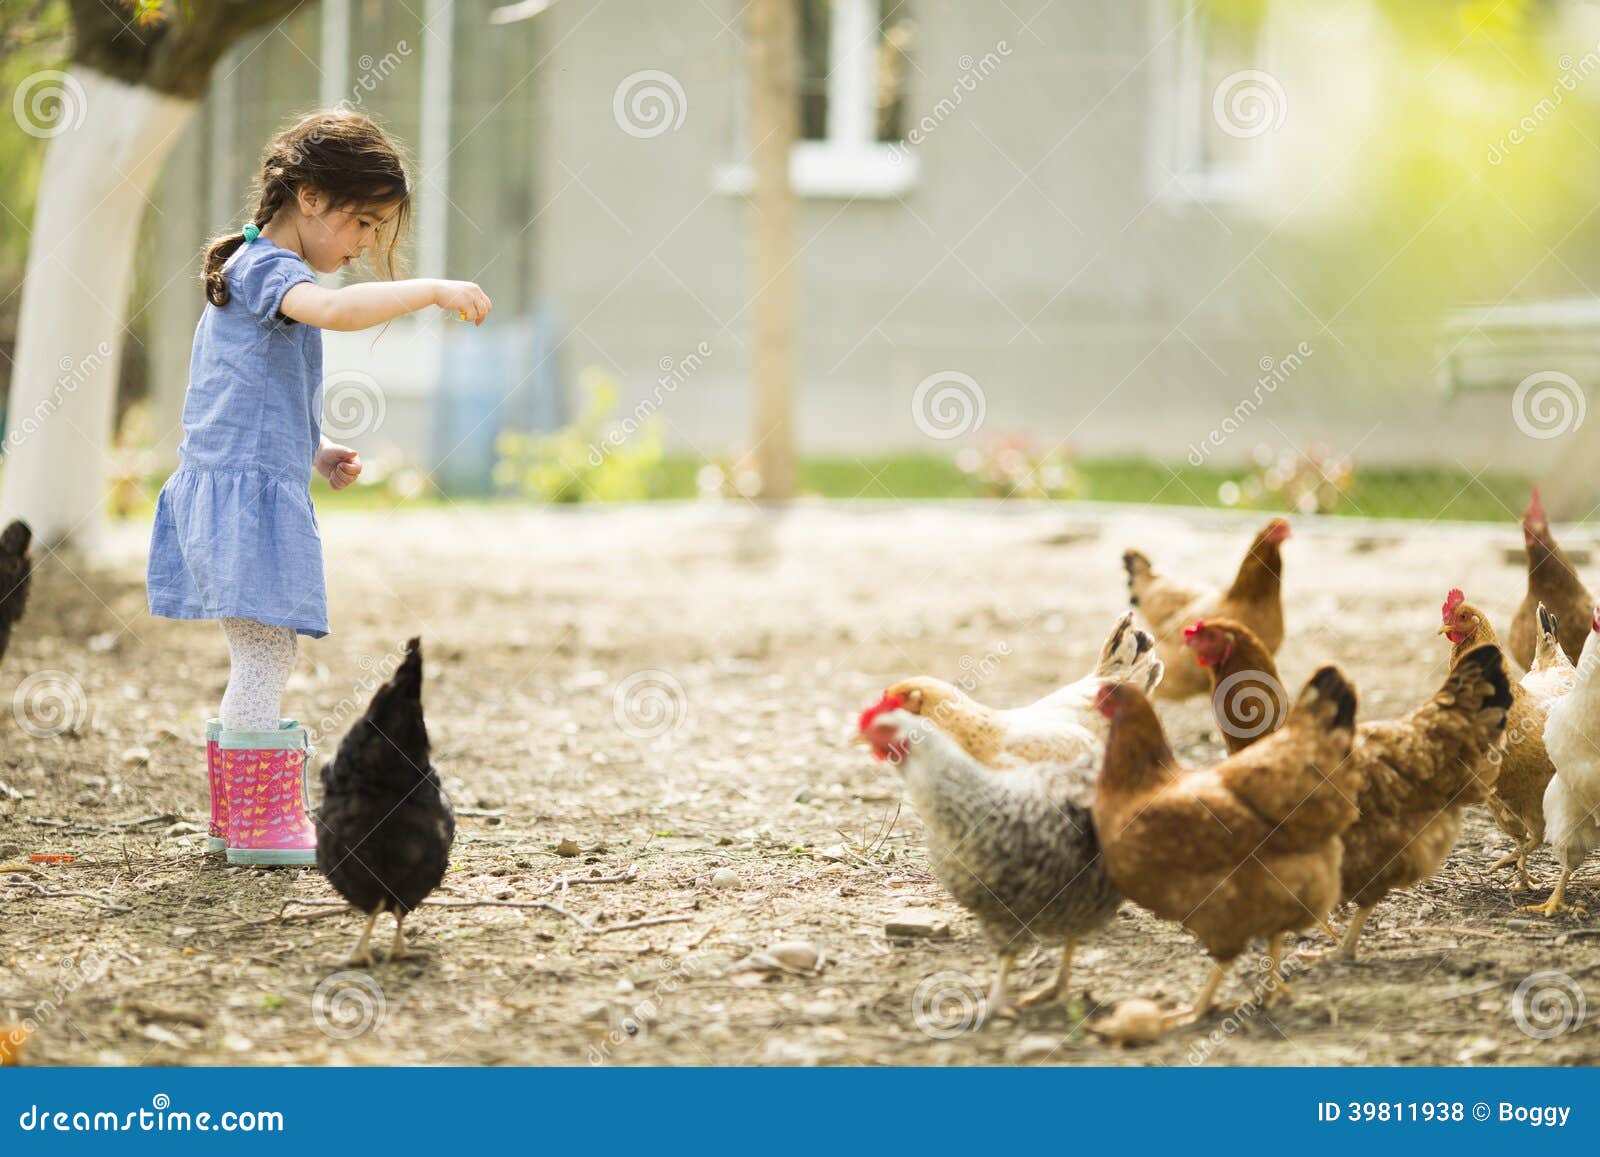 Feeding Chickens In The Barnyard A Person Feeds Chickens With Grain Royalty Free Stock 